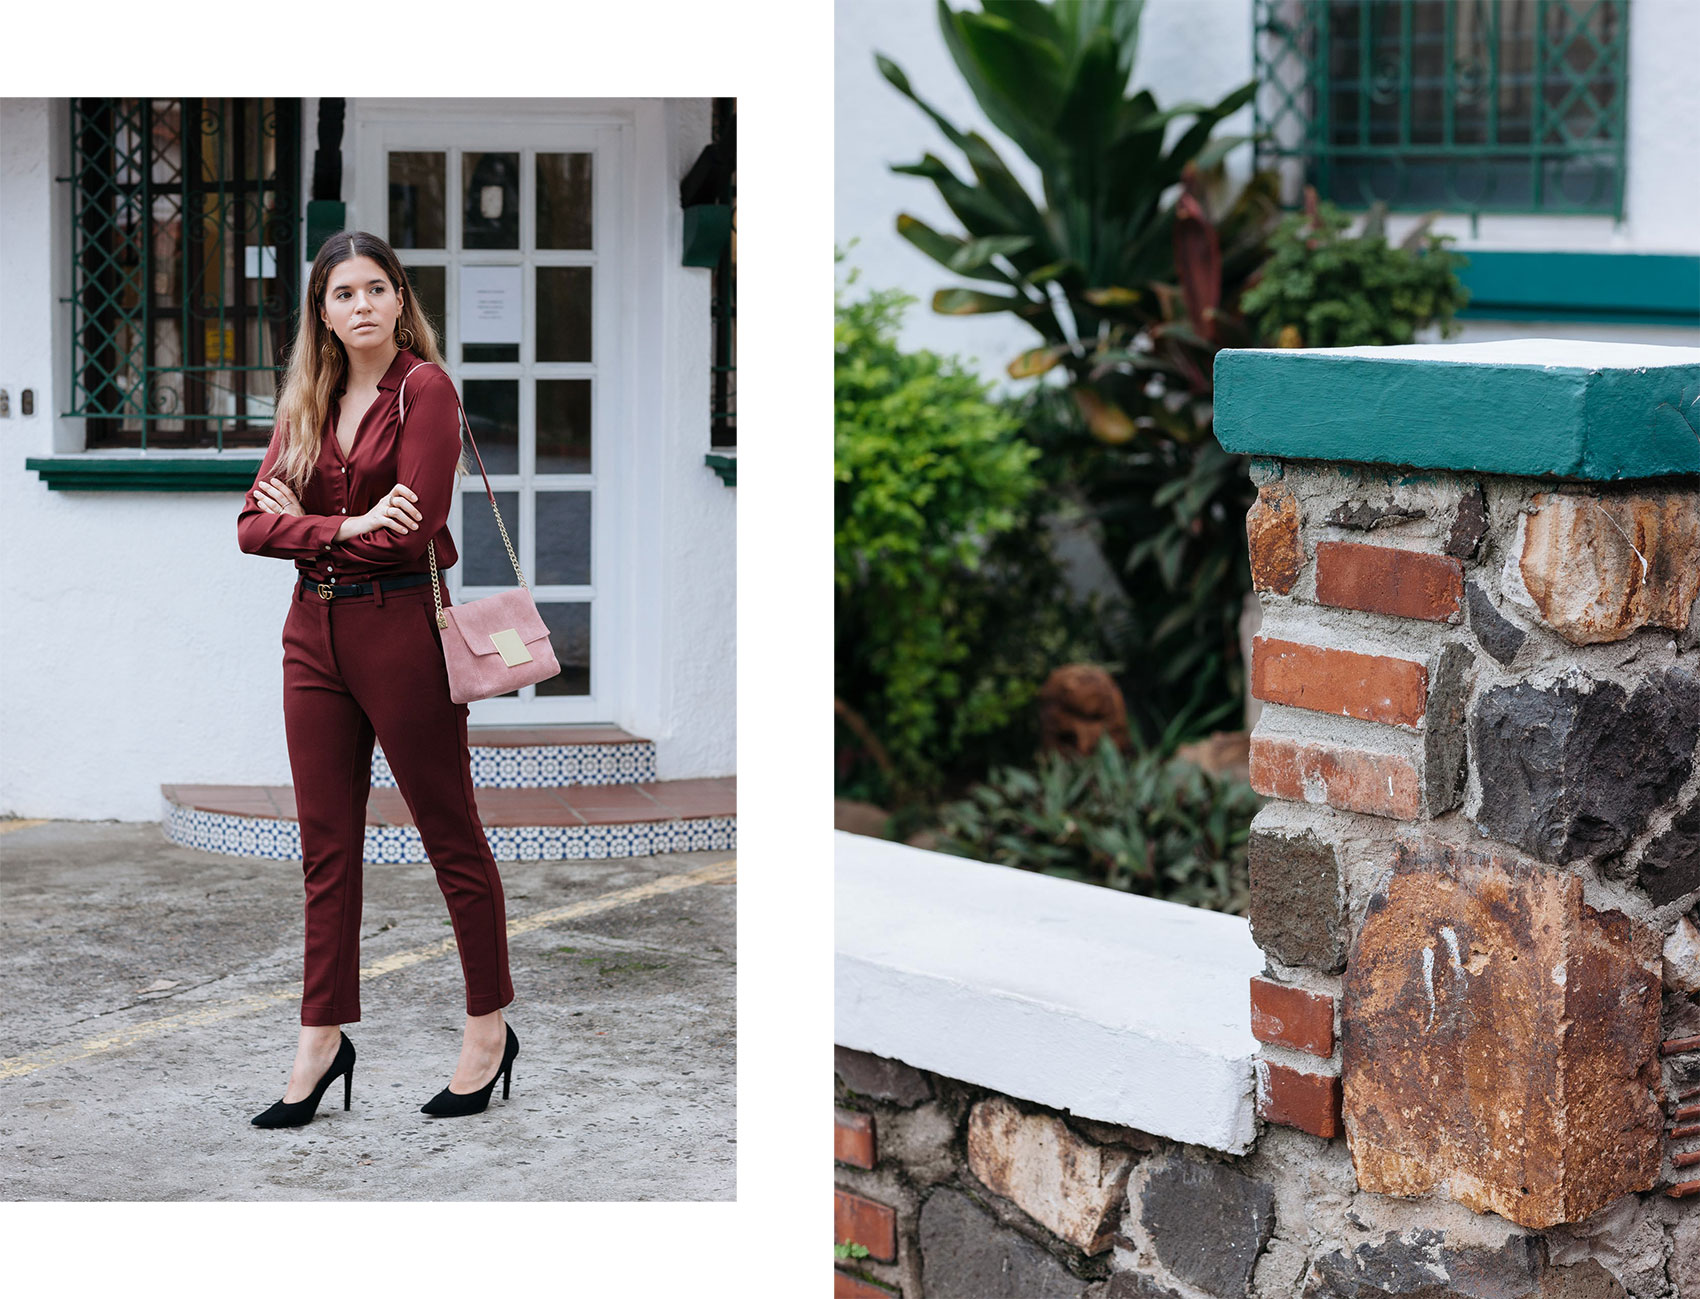 Blogger Maristella wears all wine red burgundy with dusty rose pink bag and black pumps